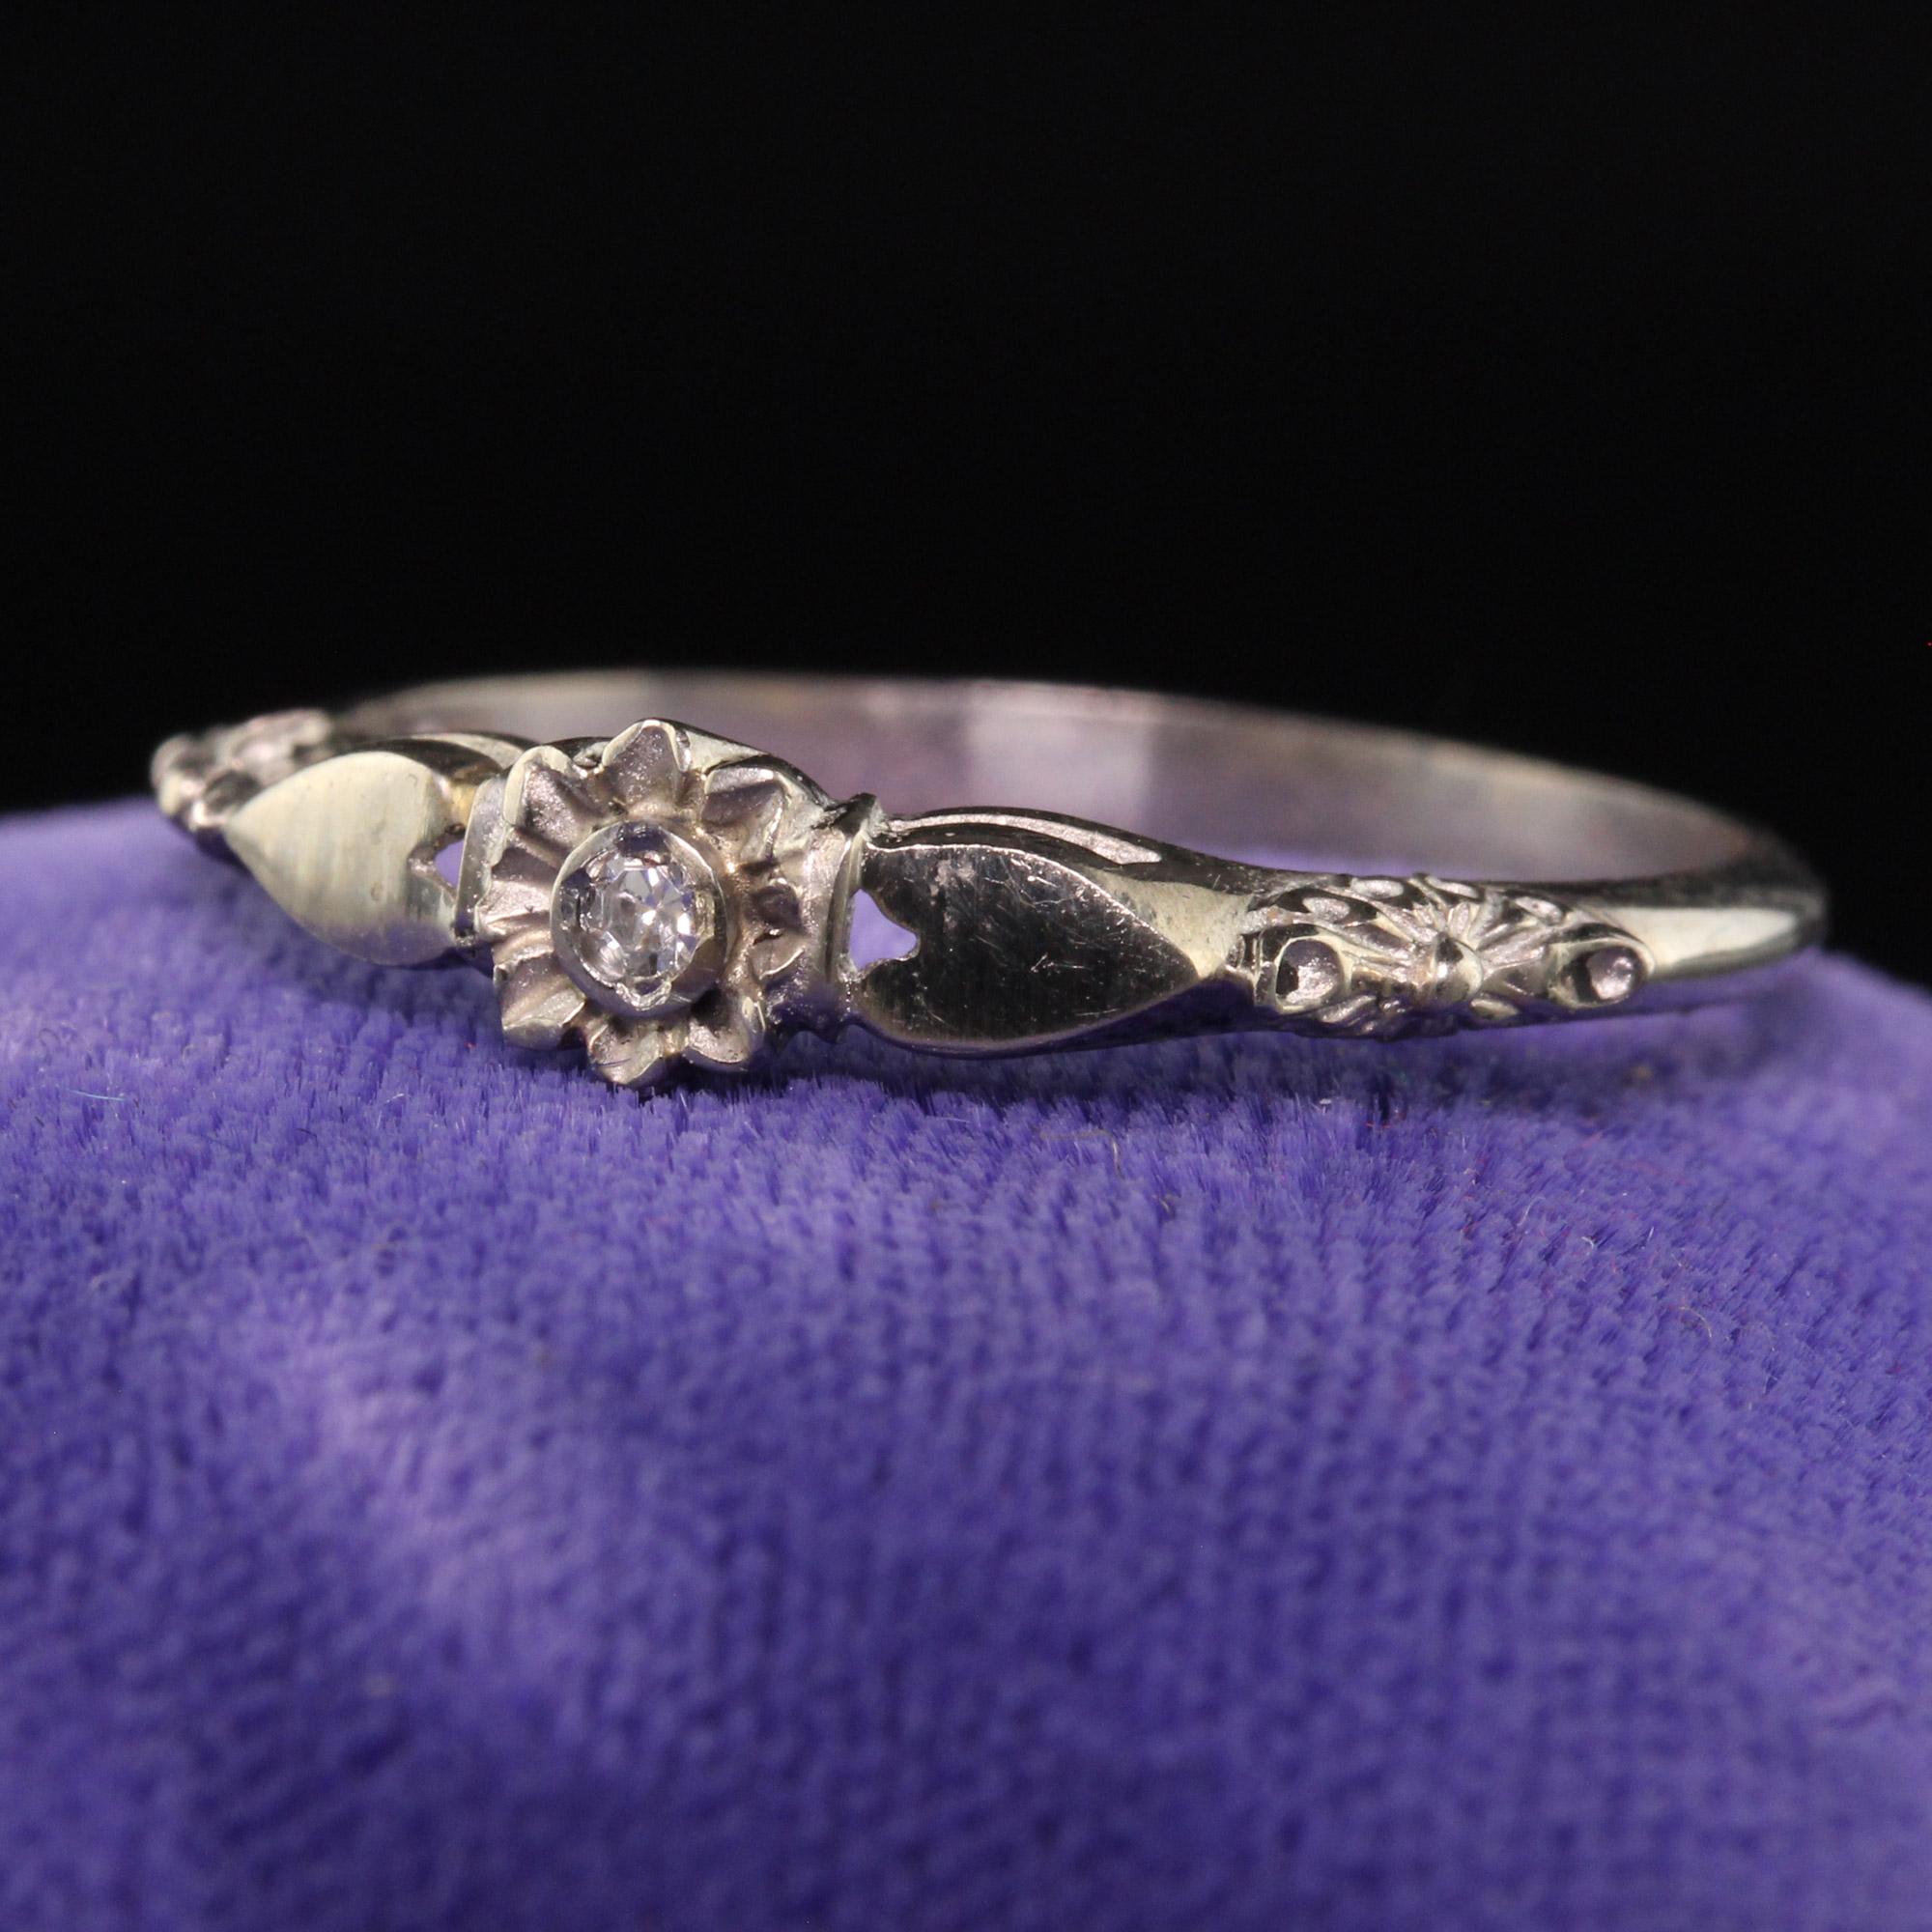 Beautiful Antique Art Deco 14K White Gold Single Cut Diamond Heart Wedding Band. This gorgeous wedding band is crafted in 14K white gold and has a single cut diamond in the center of the flower and heart shaped designs on the sides.

Item